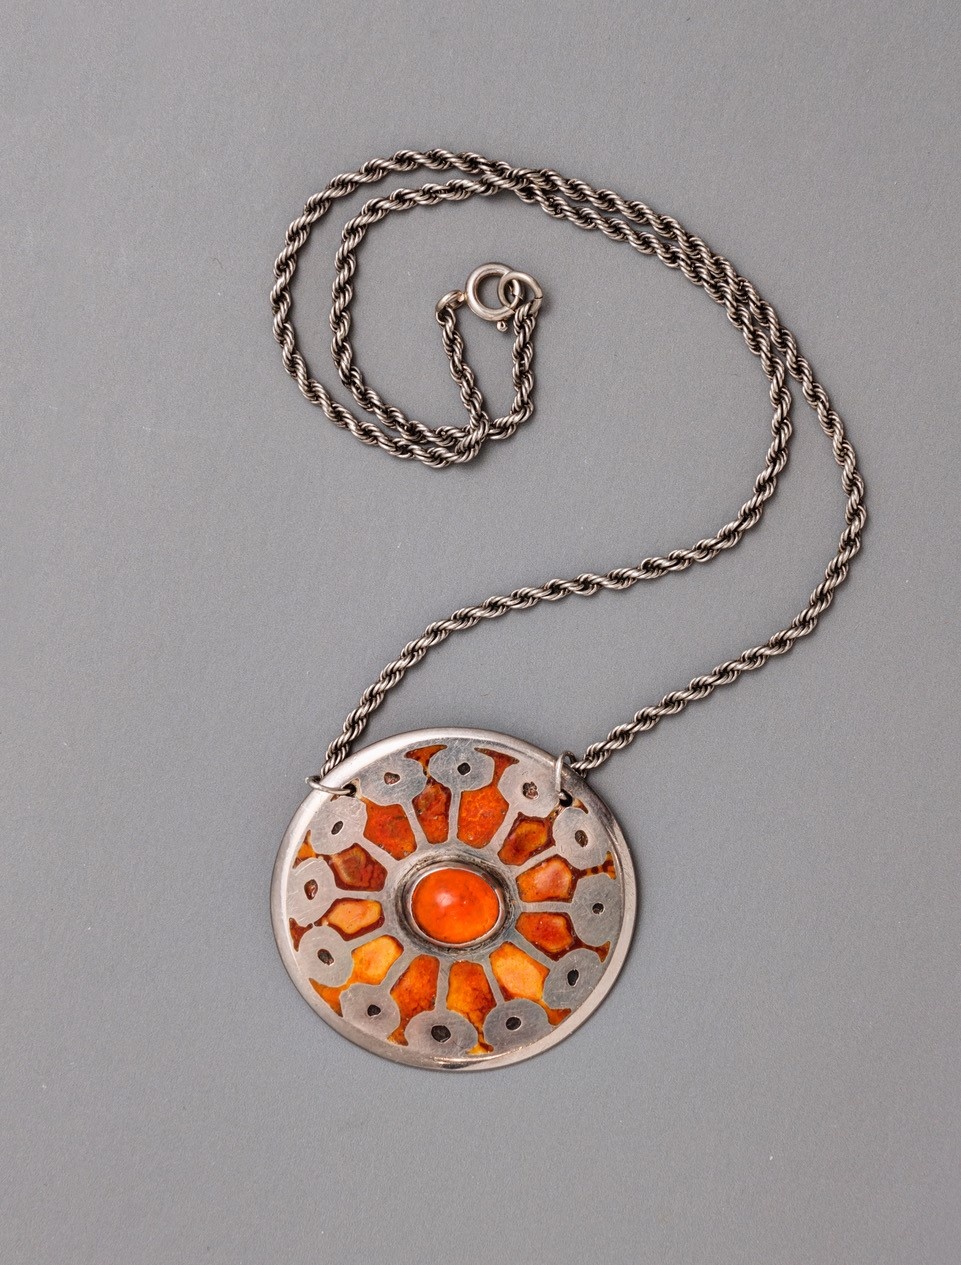 A circular silver medallion is attached to a silver chain. Silver ovals circle the outer edge of the medallion and connect to a small orange oval stone is set in the middle of the medallion with thin lines. Below the silver design is a smooth orange stone with hints of yellow and red.